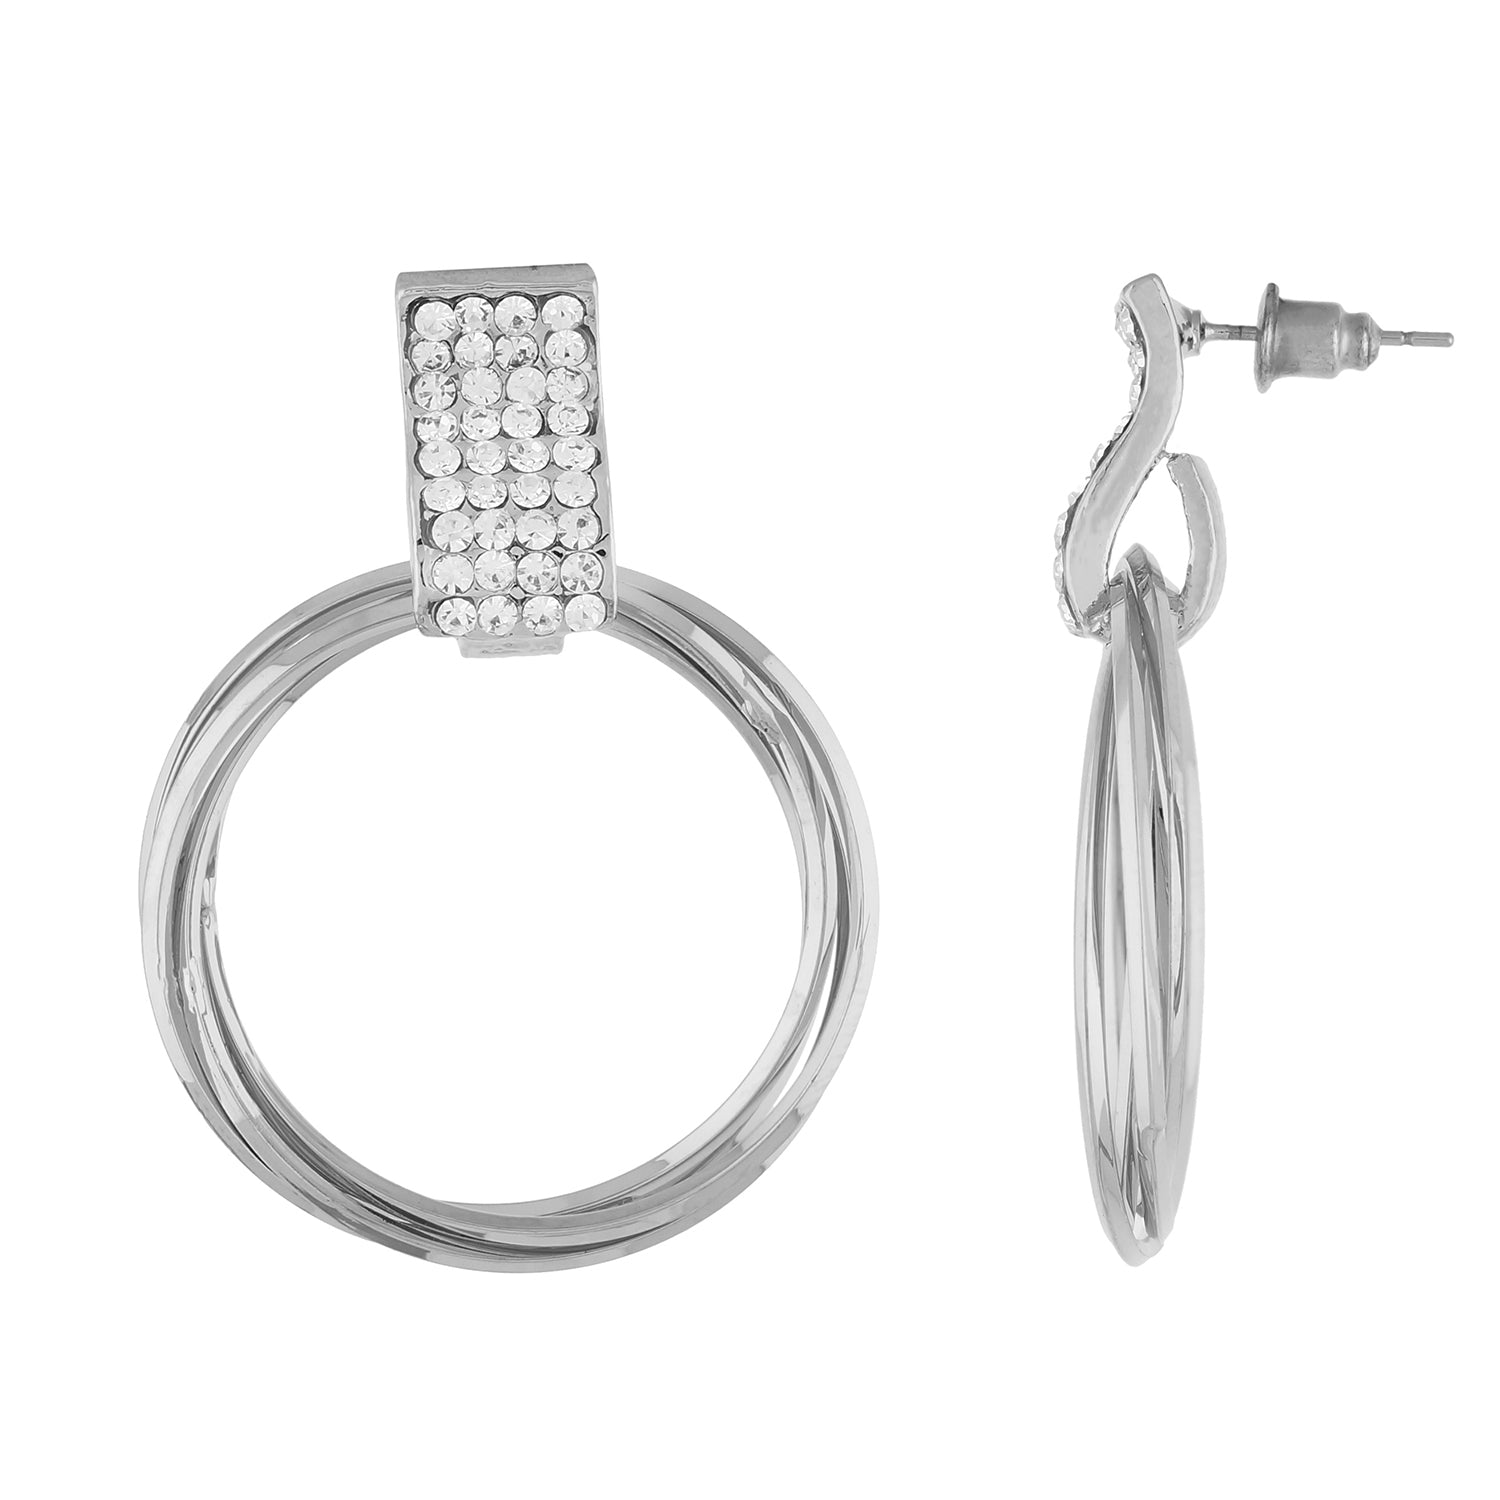 Classy Silver Colour Round Ring Design Earring for Girls and Women